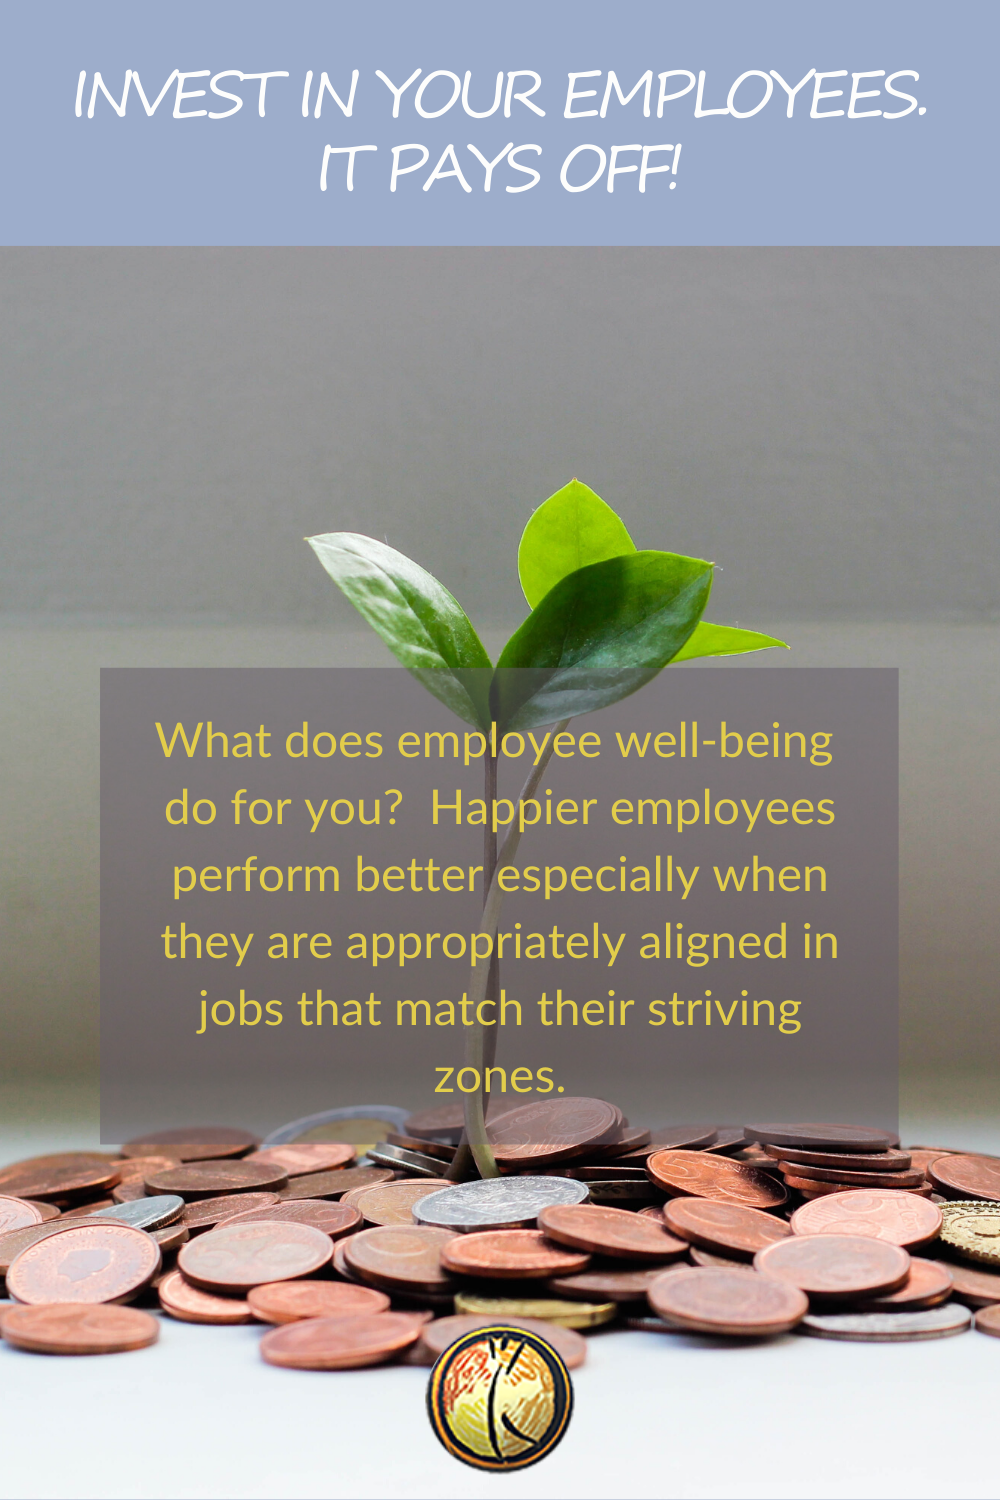 Do you want to know how? Invest in your employee